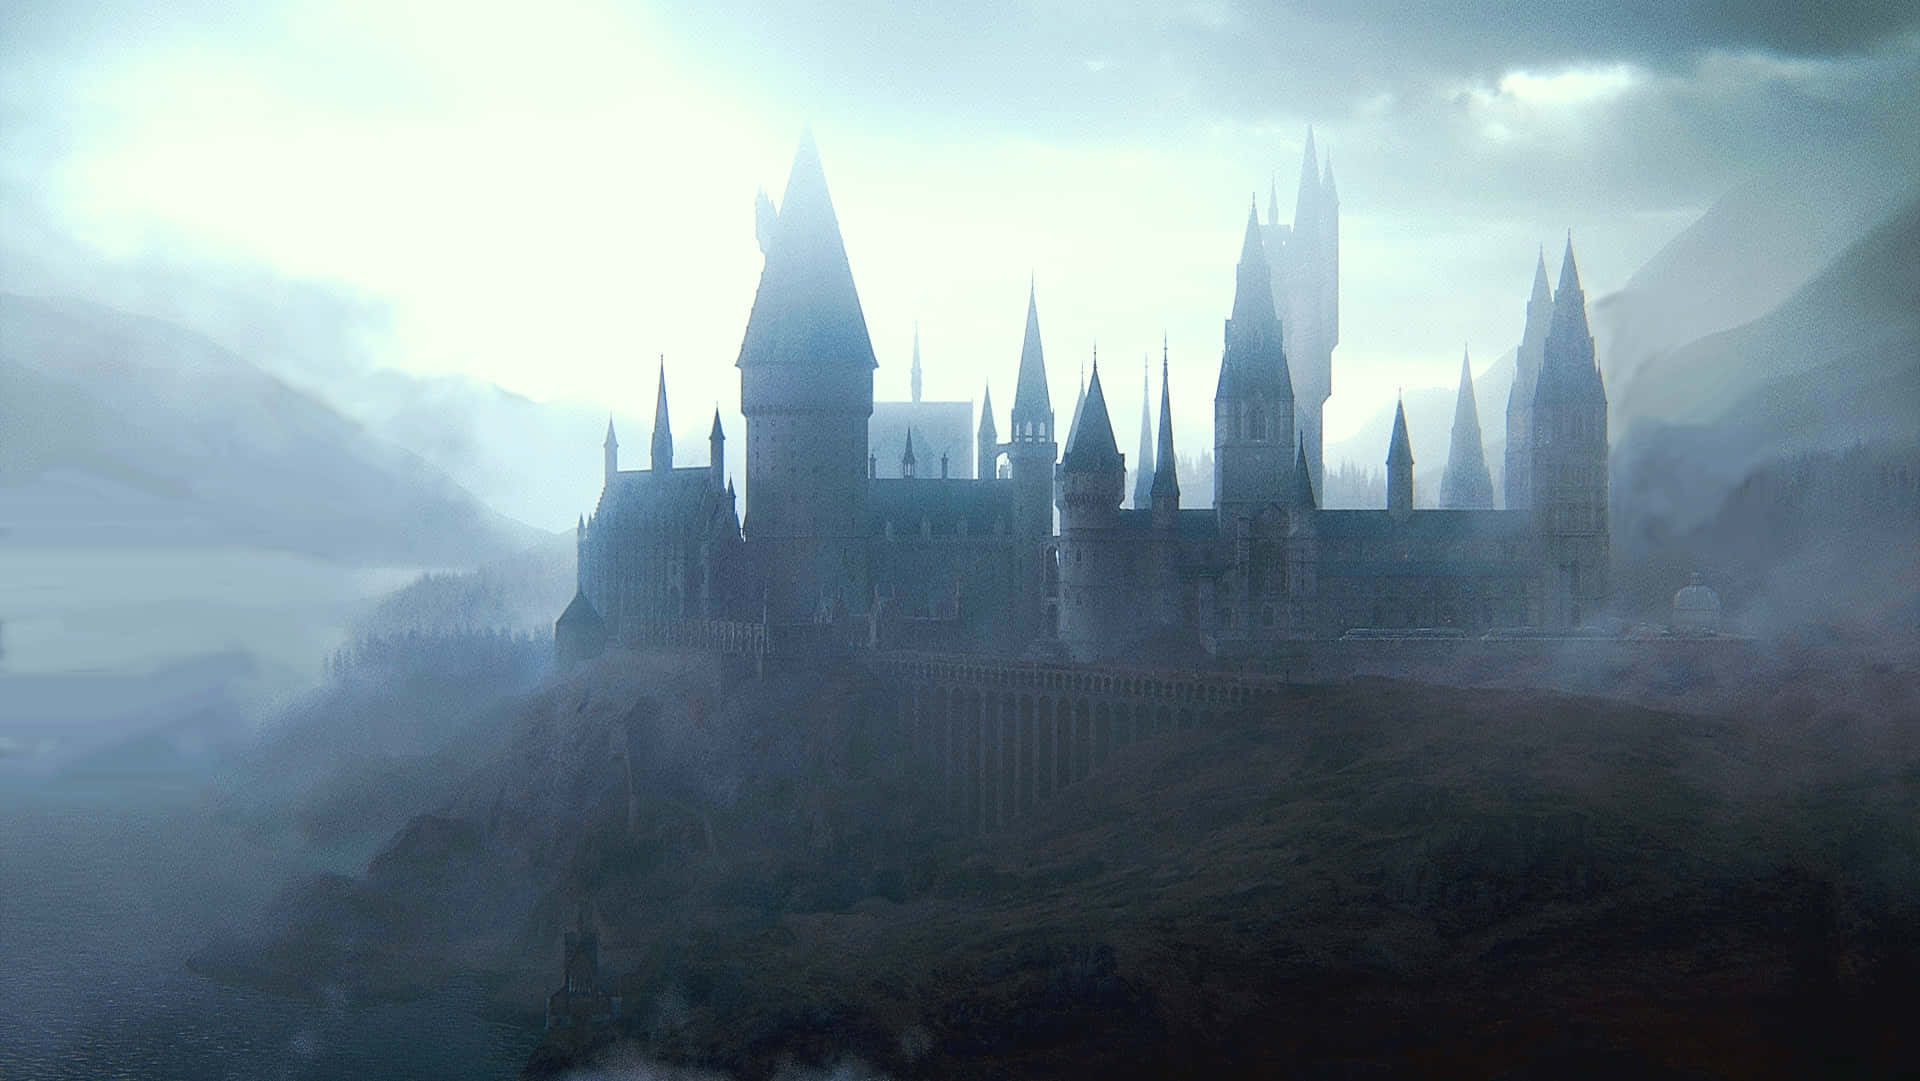 Hogwarts Castle - "The Most Feared and Revered School on Earth"